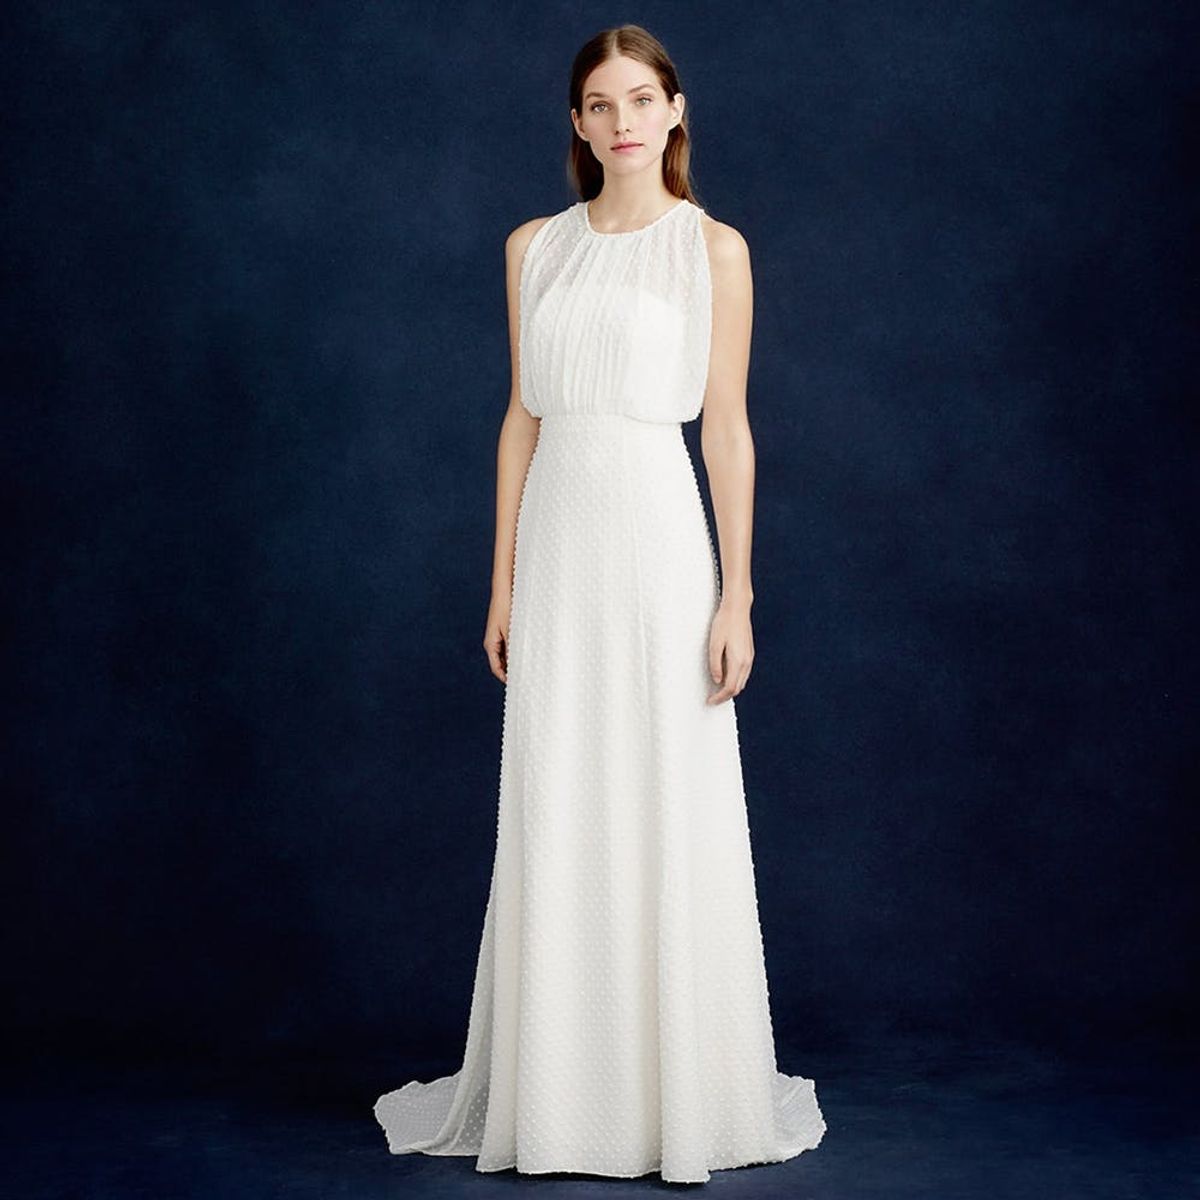 J.Crew’s Spring Bridal Lookbook Is Made for the Modern Bride